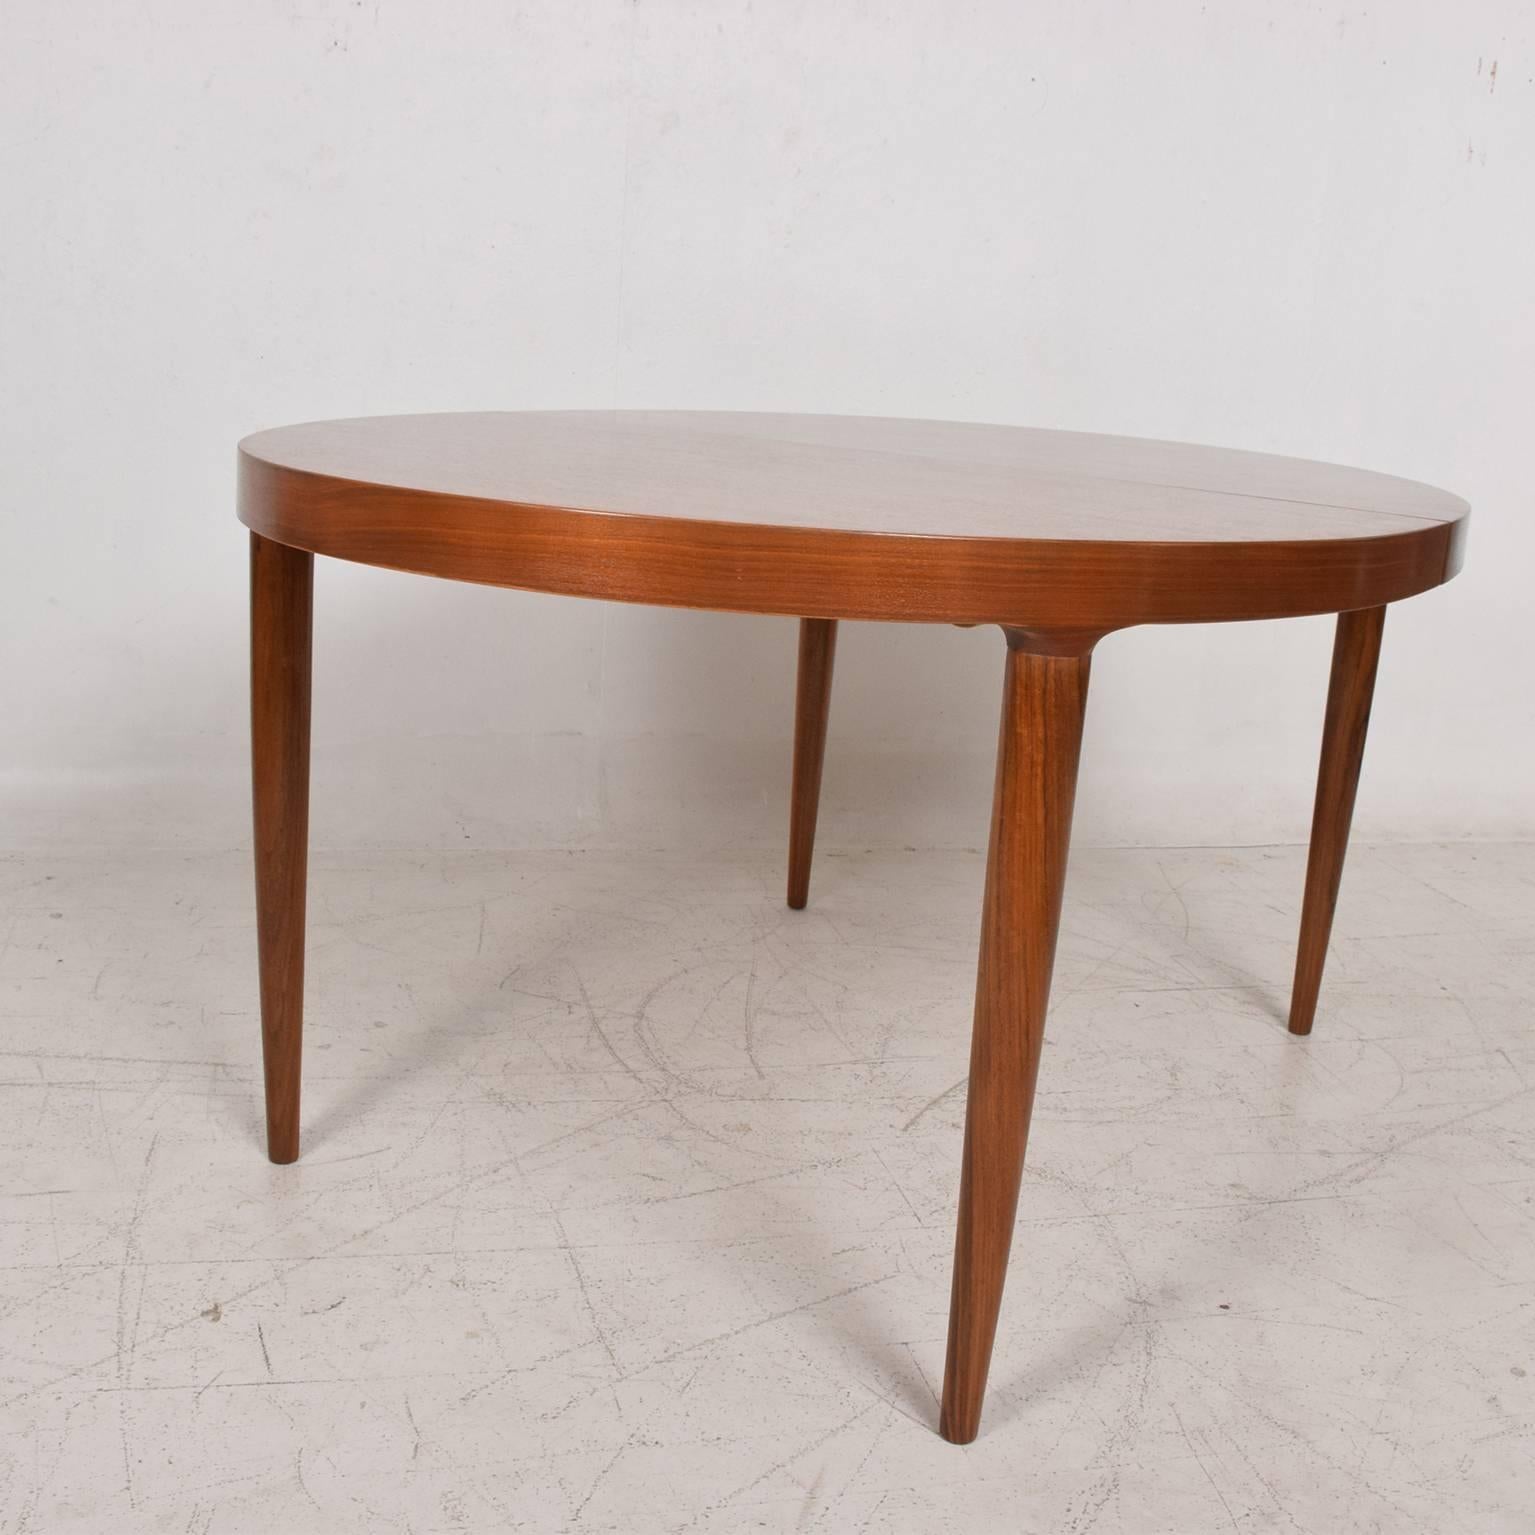 Midcentury Danish Modern Teak Dining Table in Excellent Condition 3